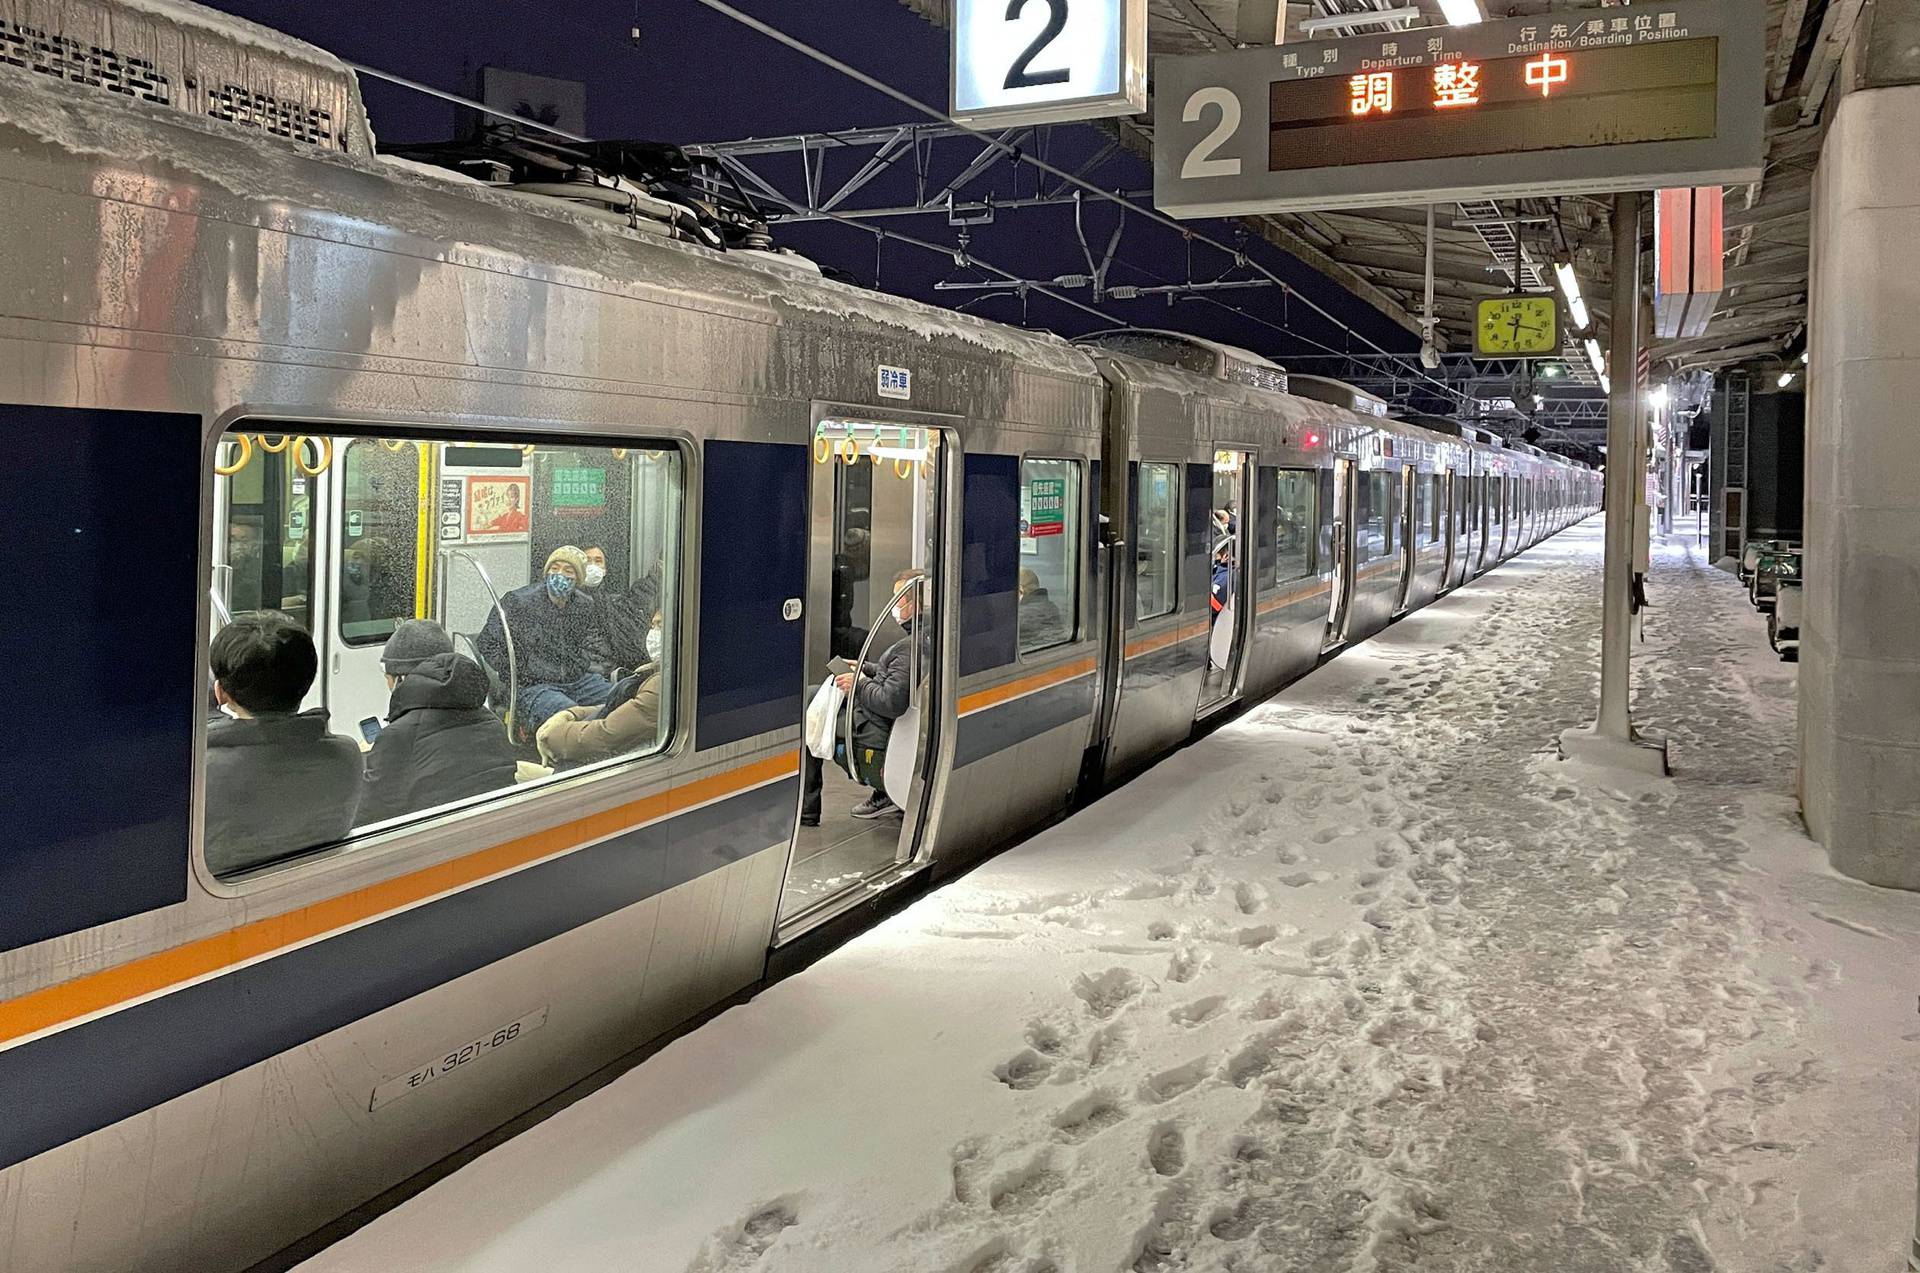 A train is stranded due to heavy snow at Nishioji station in Kyoto